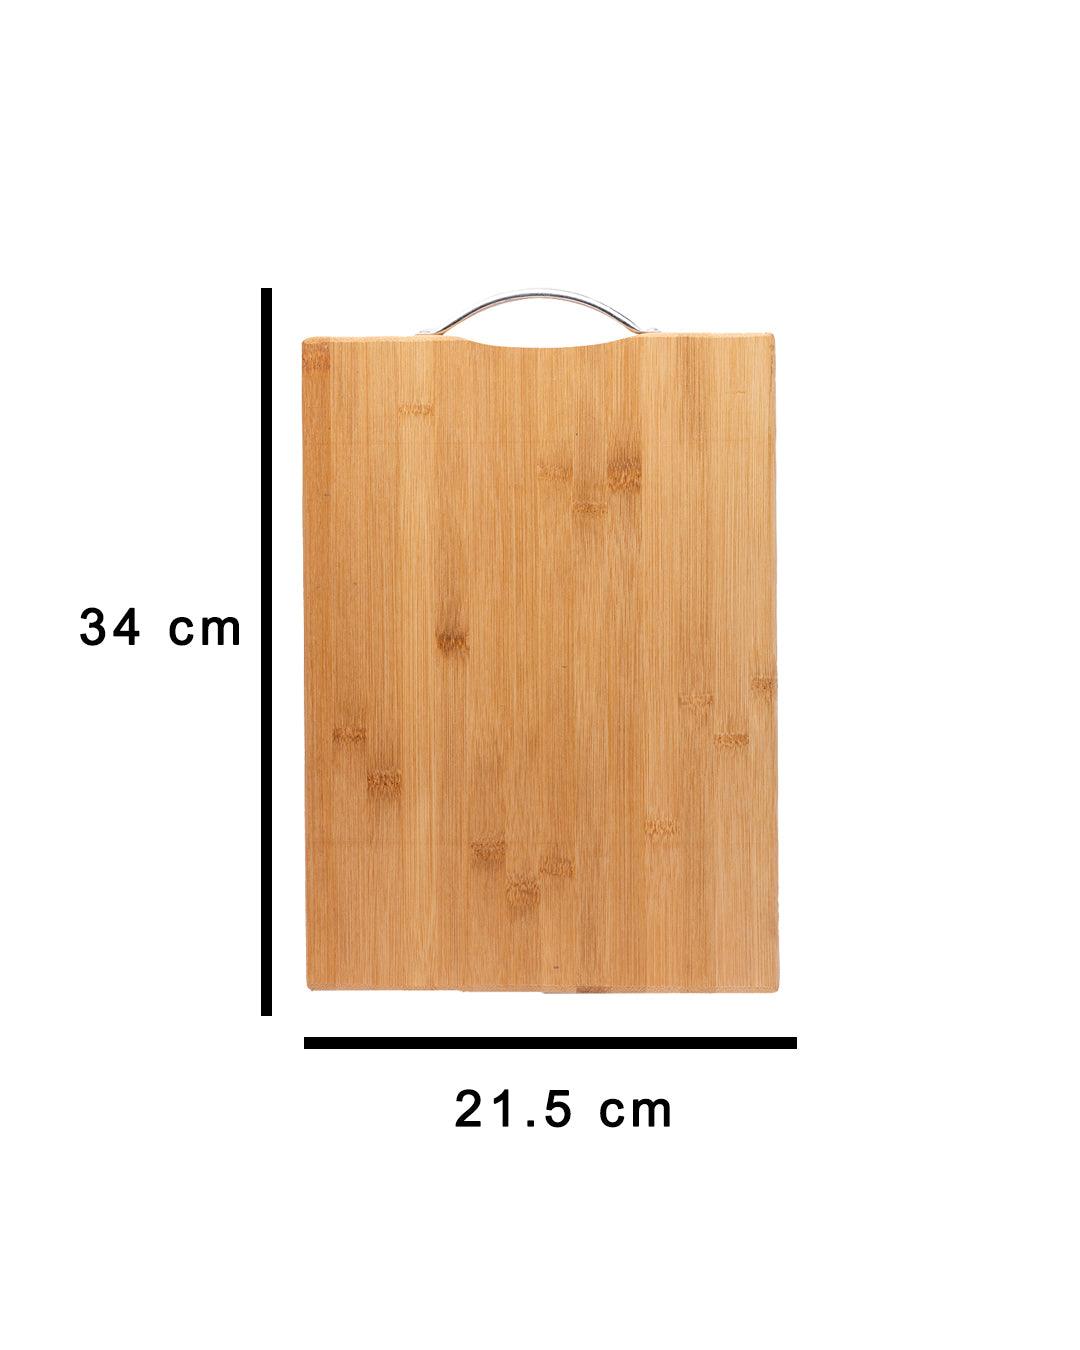 Chopping Board, with Metal Handle, Wooden Finish, Natural Wood Colour,  Bamboo - MARKET 99